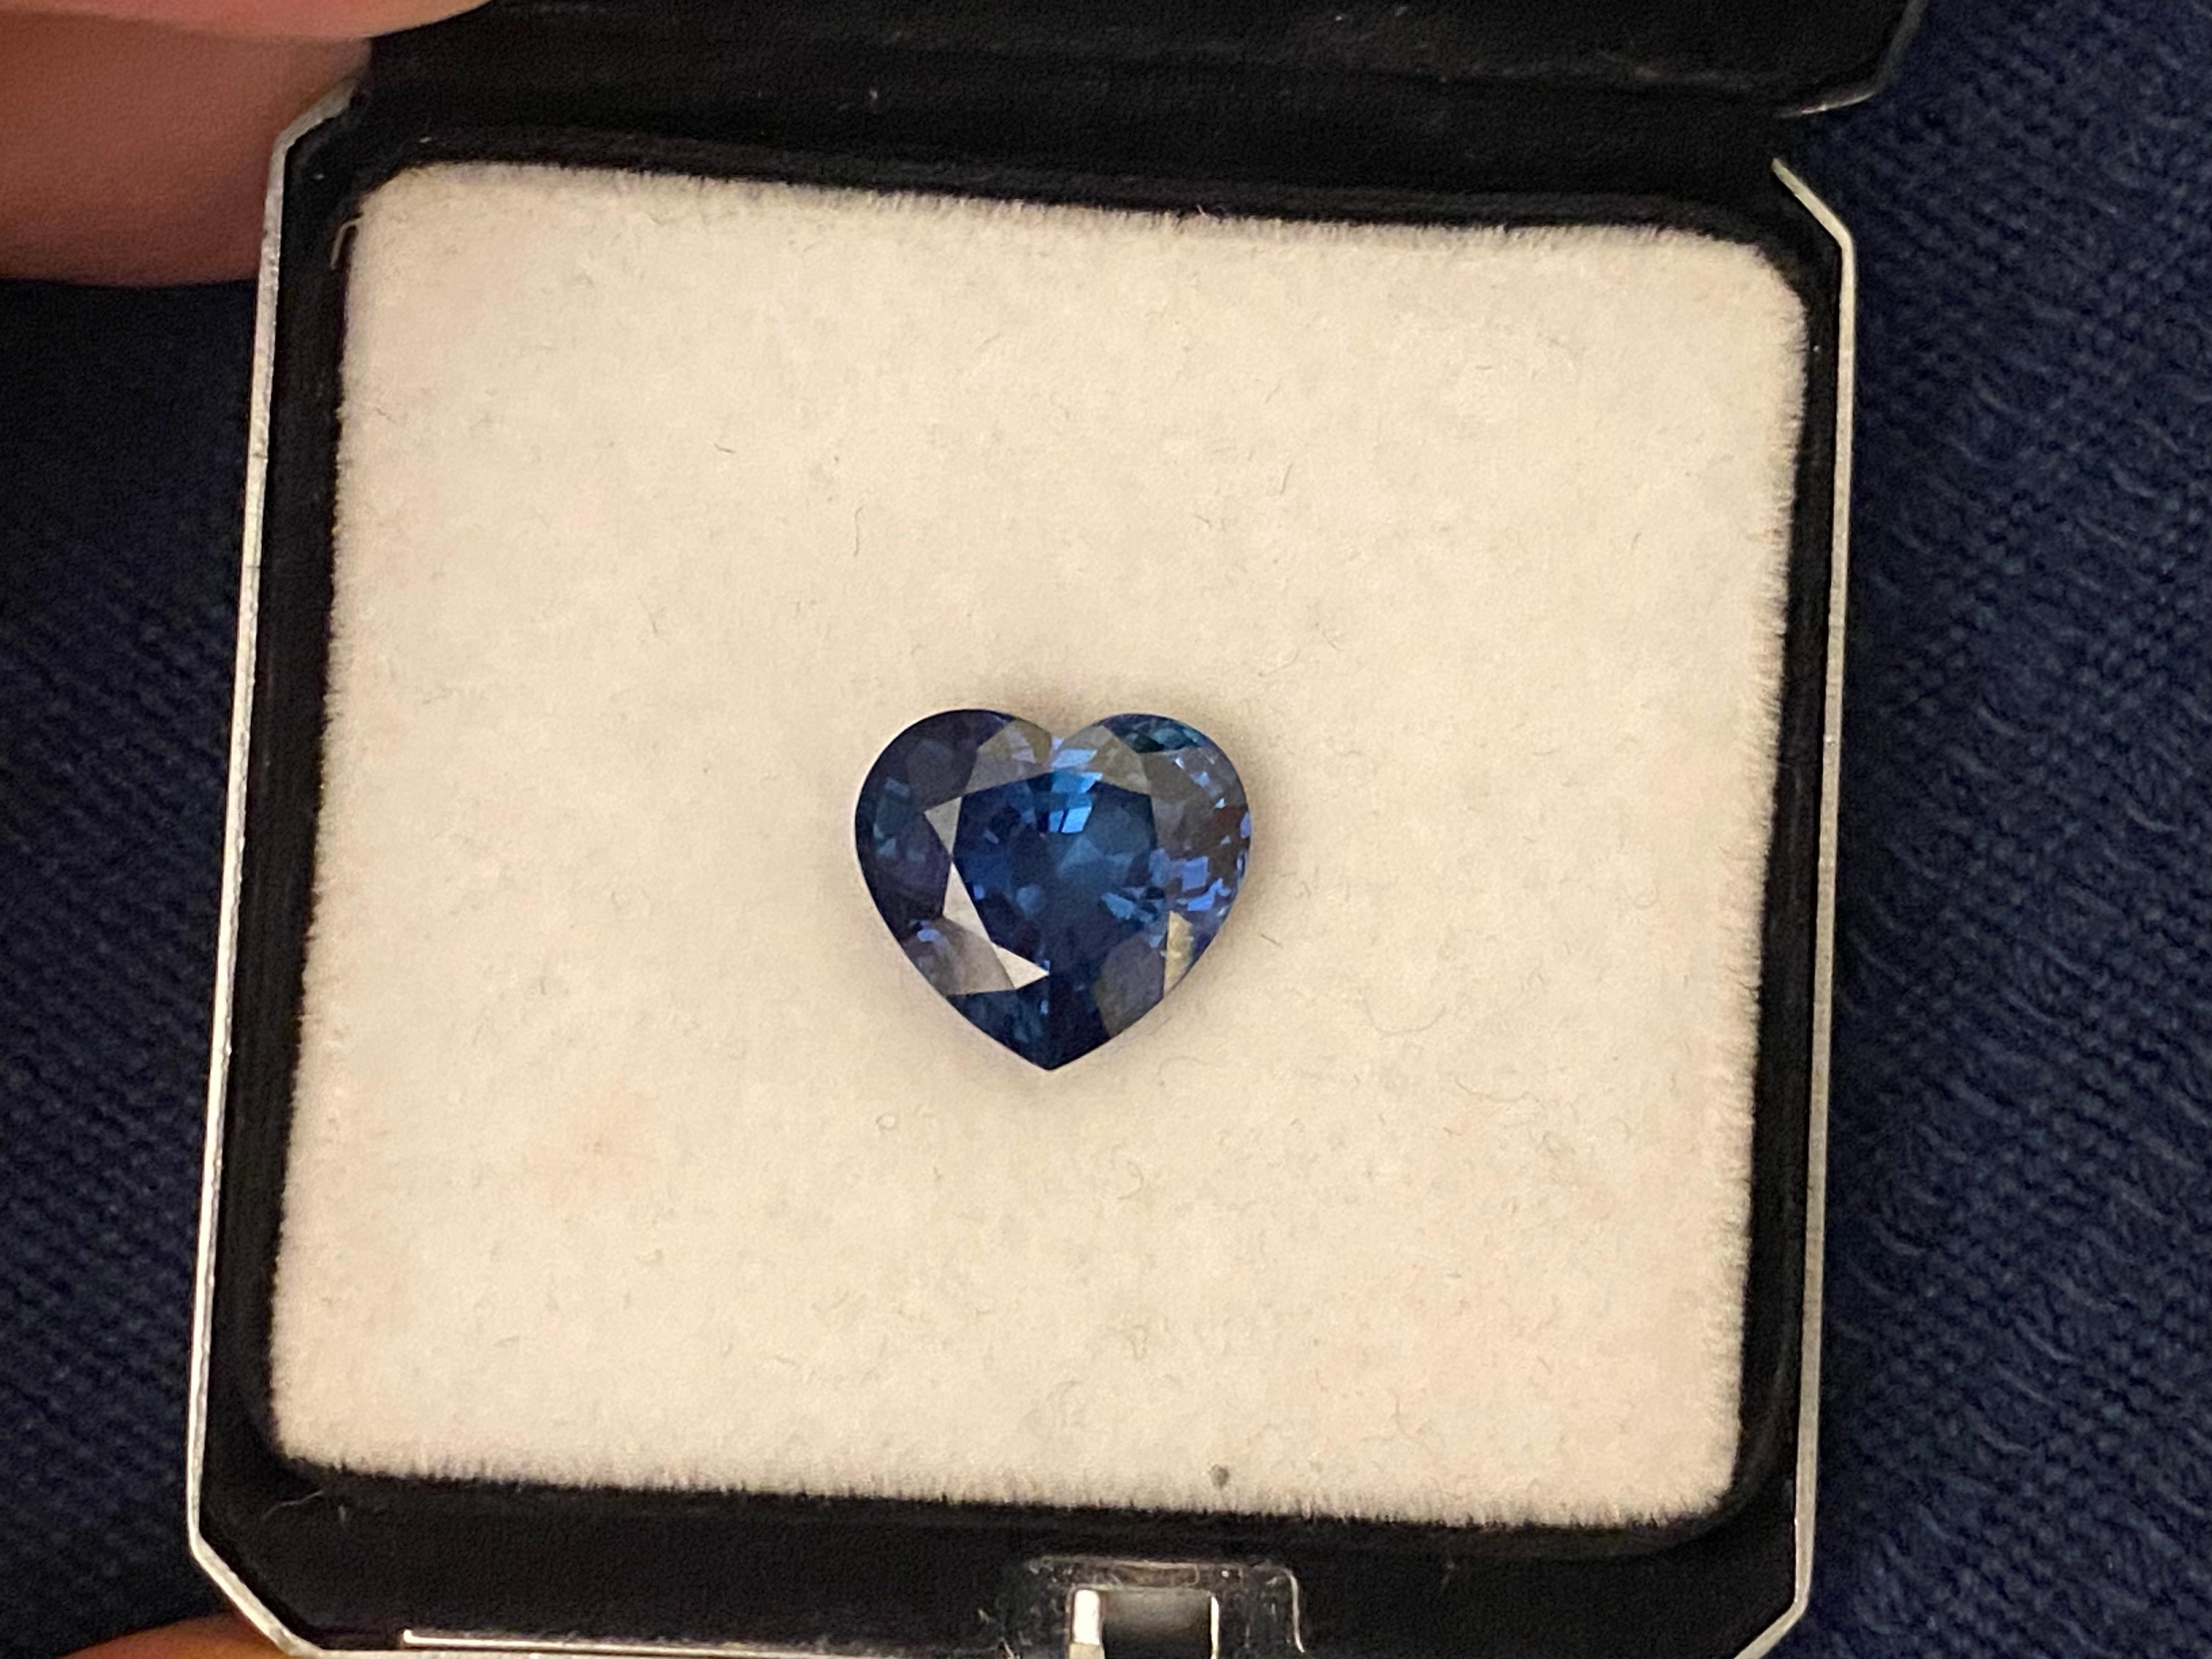 Women's or Men's AGL/GRS Certified 9.99 Carat Unheated Sapphire For Sale